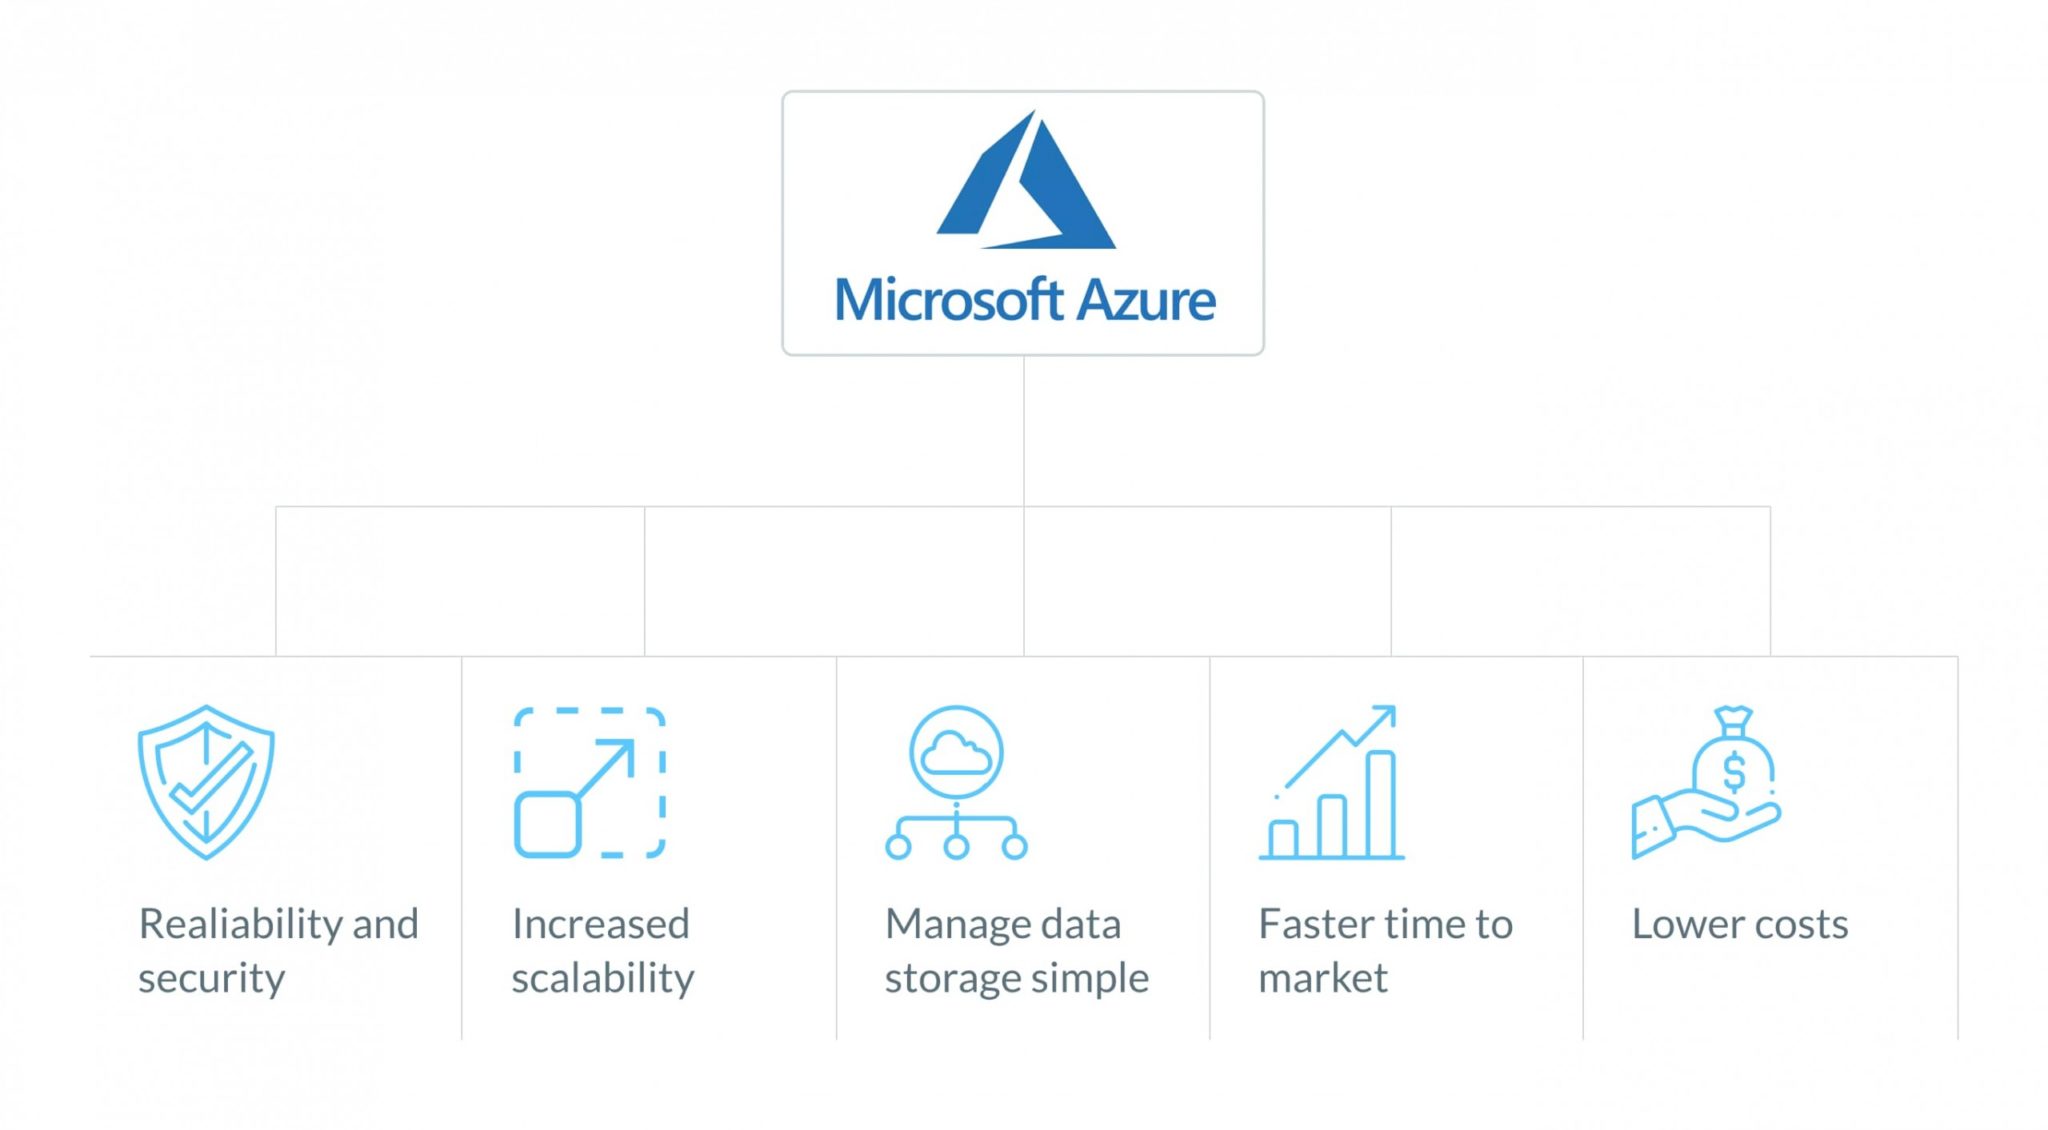 What is Azure cloud service?